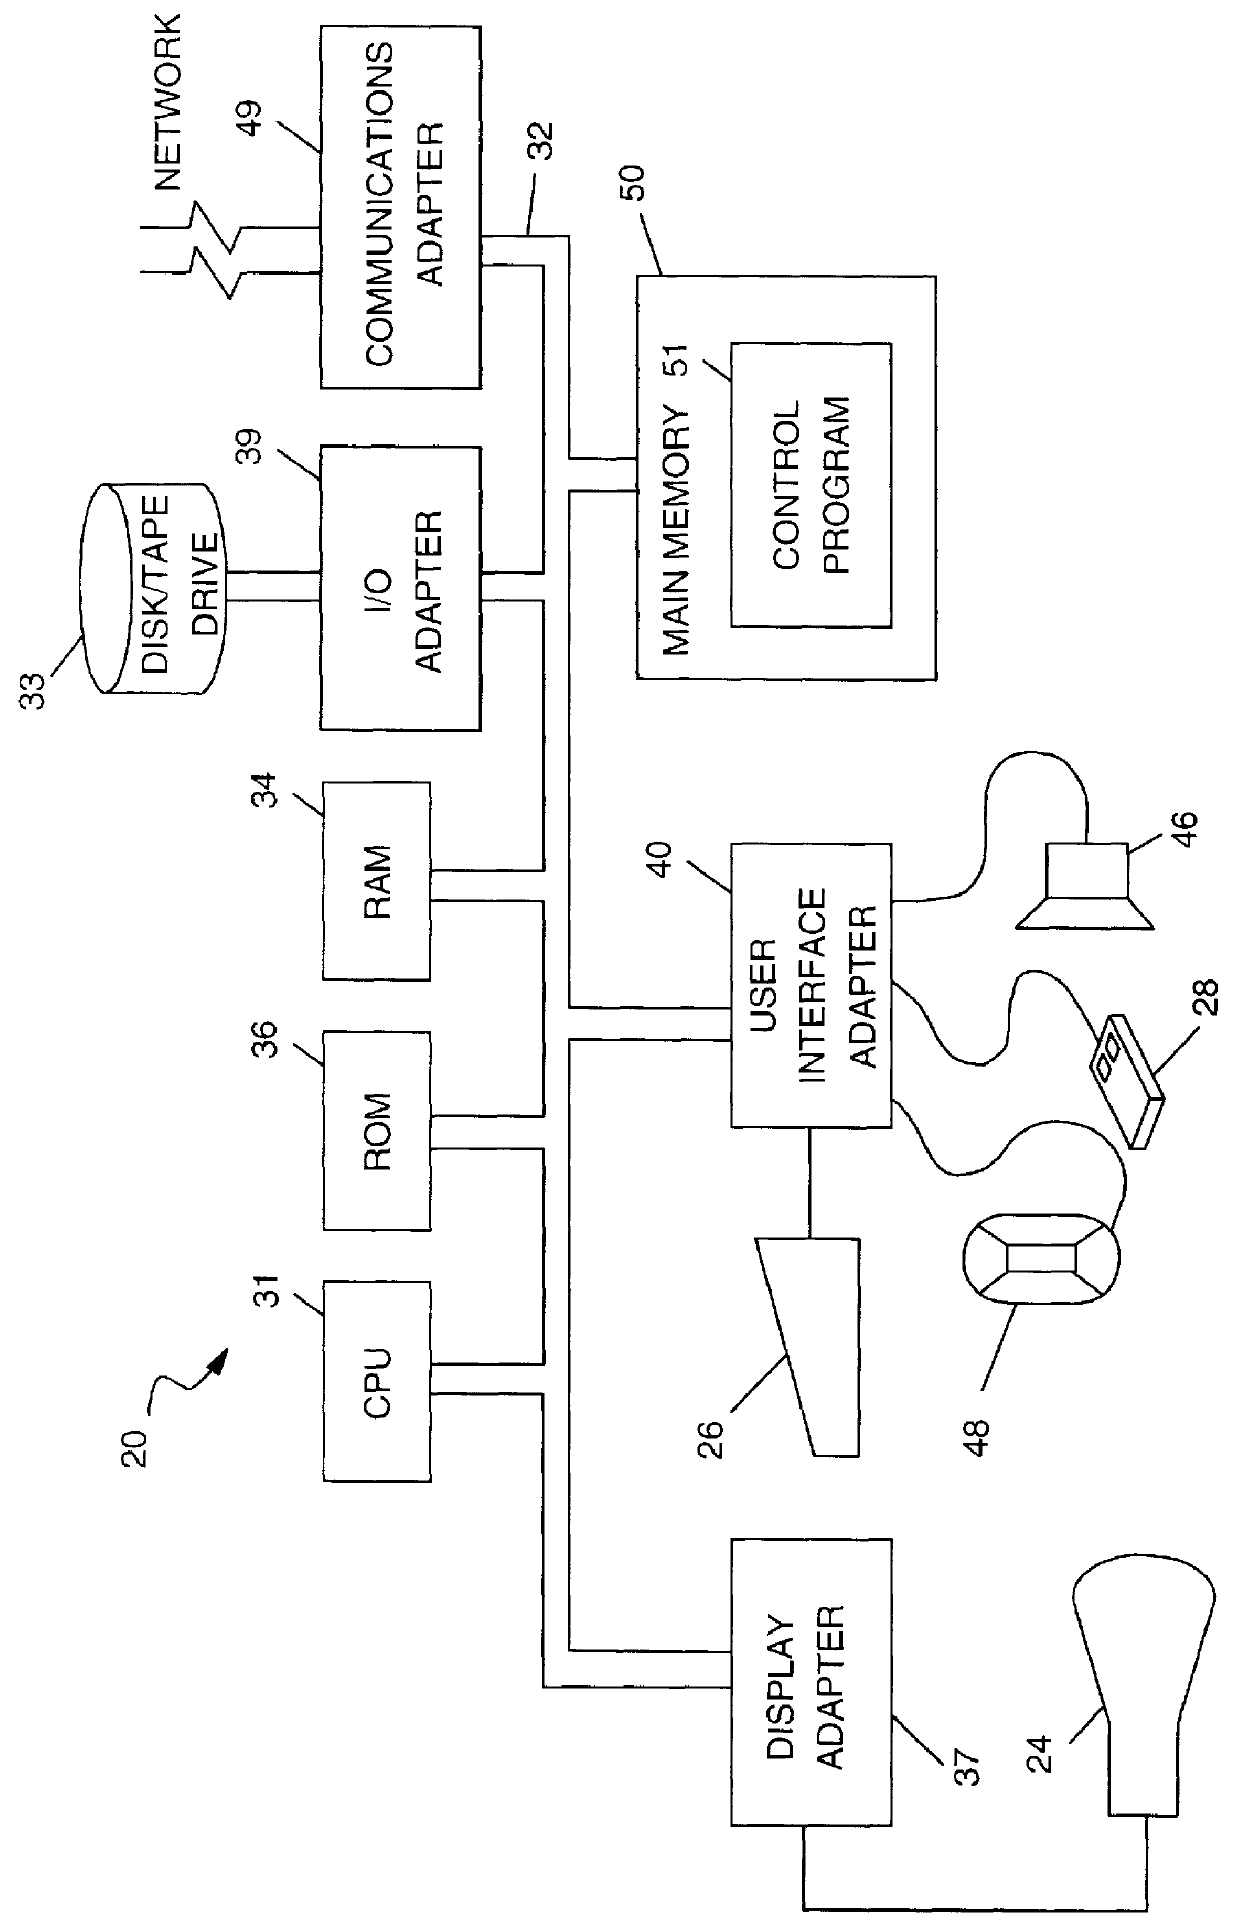 Method and system for a replaceable application interface at the user task level